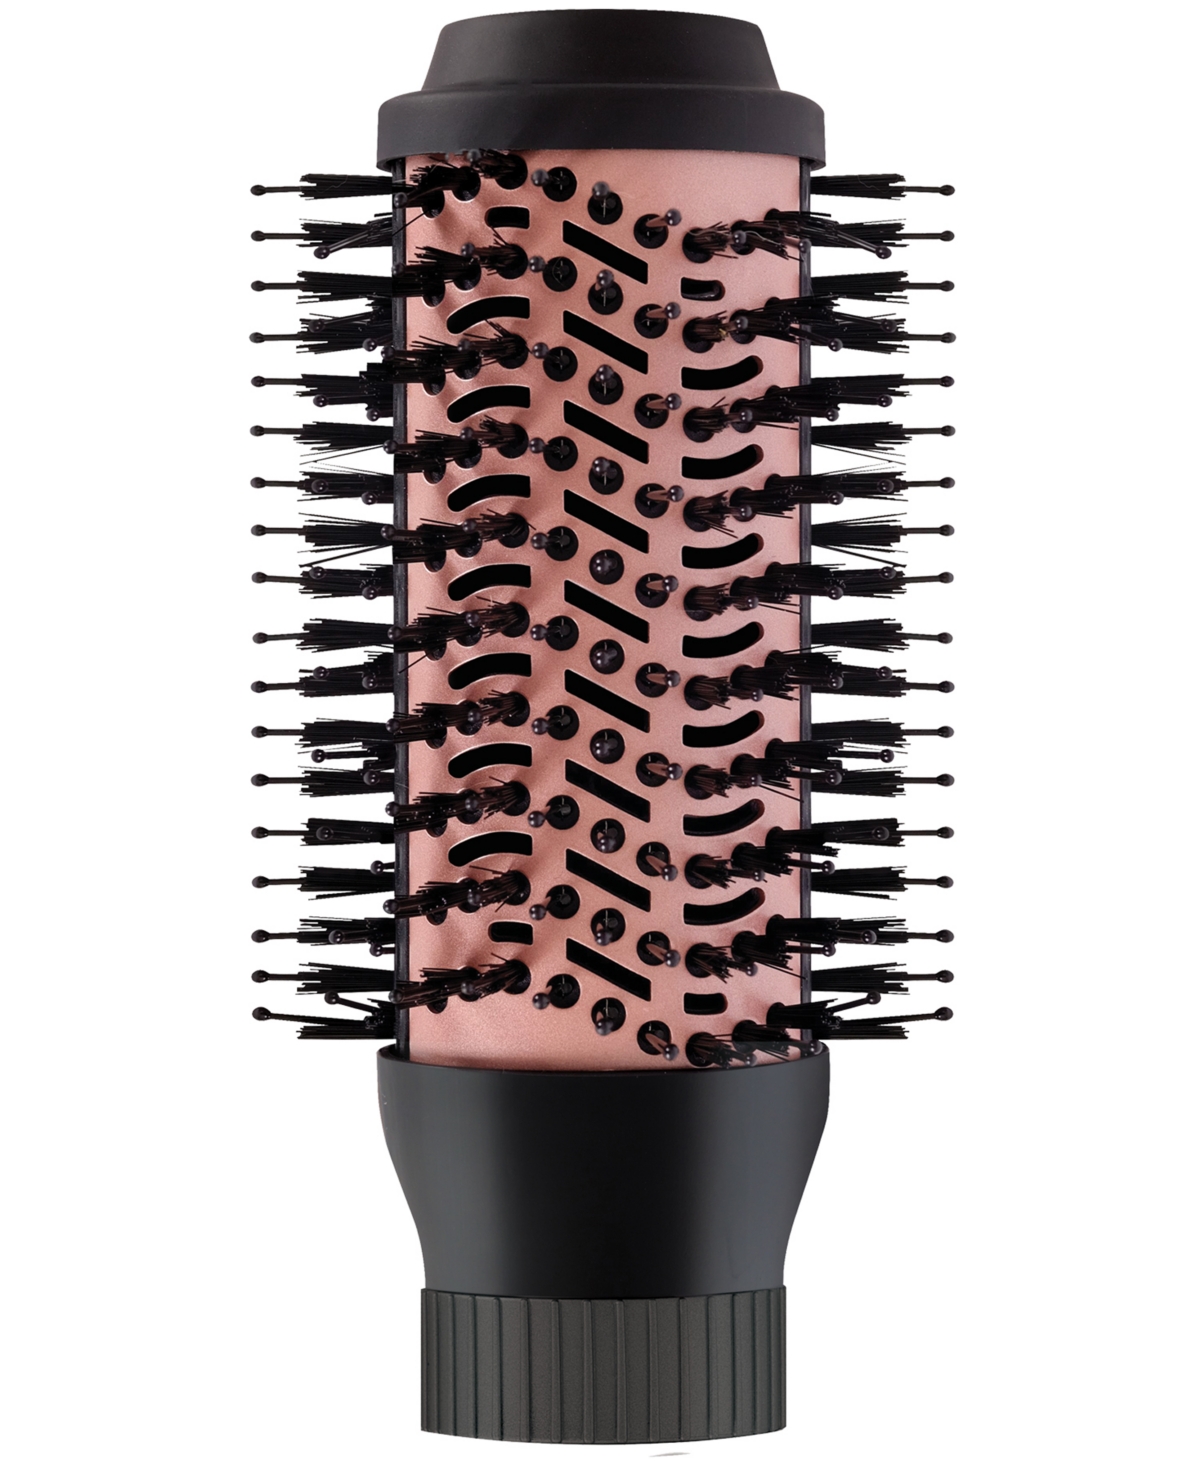 Interchangeable 2" Blowout Brush Head Attachment - Black And Rose Gold